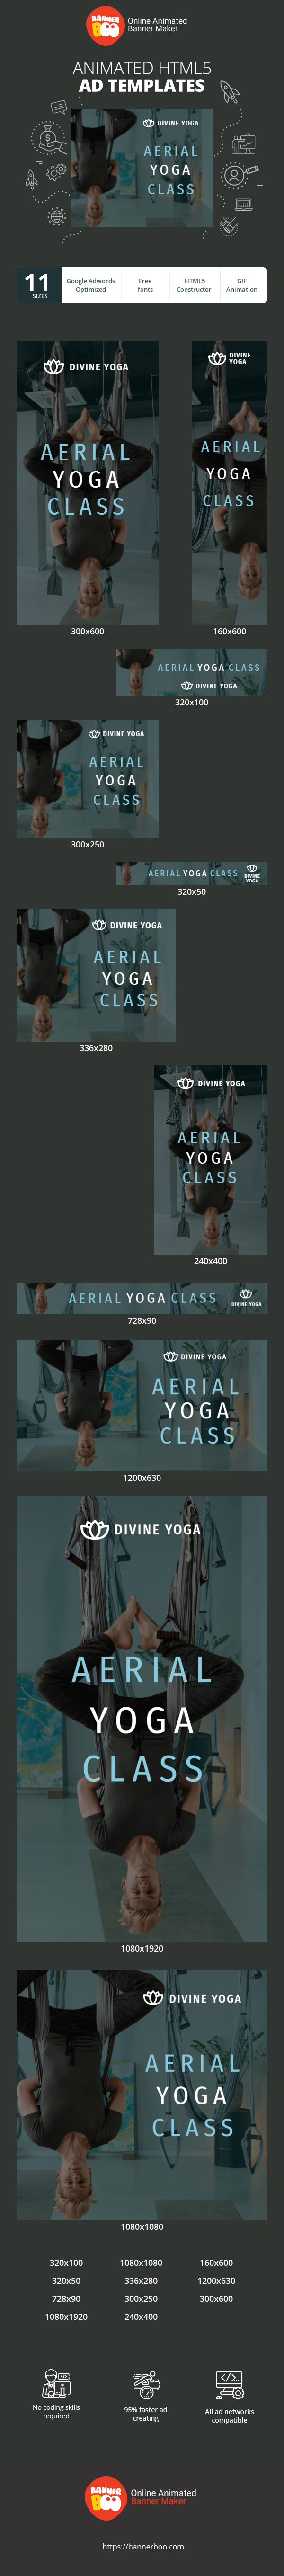 Banner ad template — Aerials Yoga Class — 30% Off Membership Plans